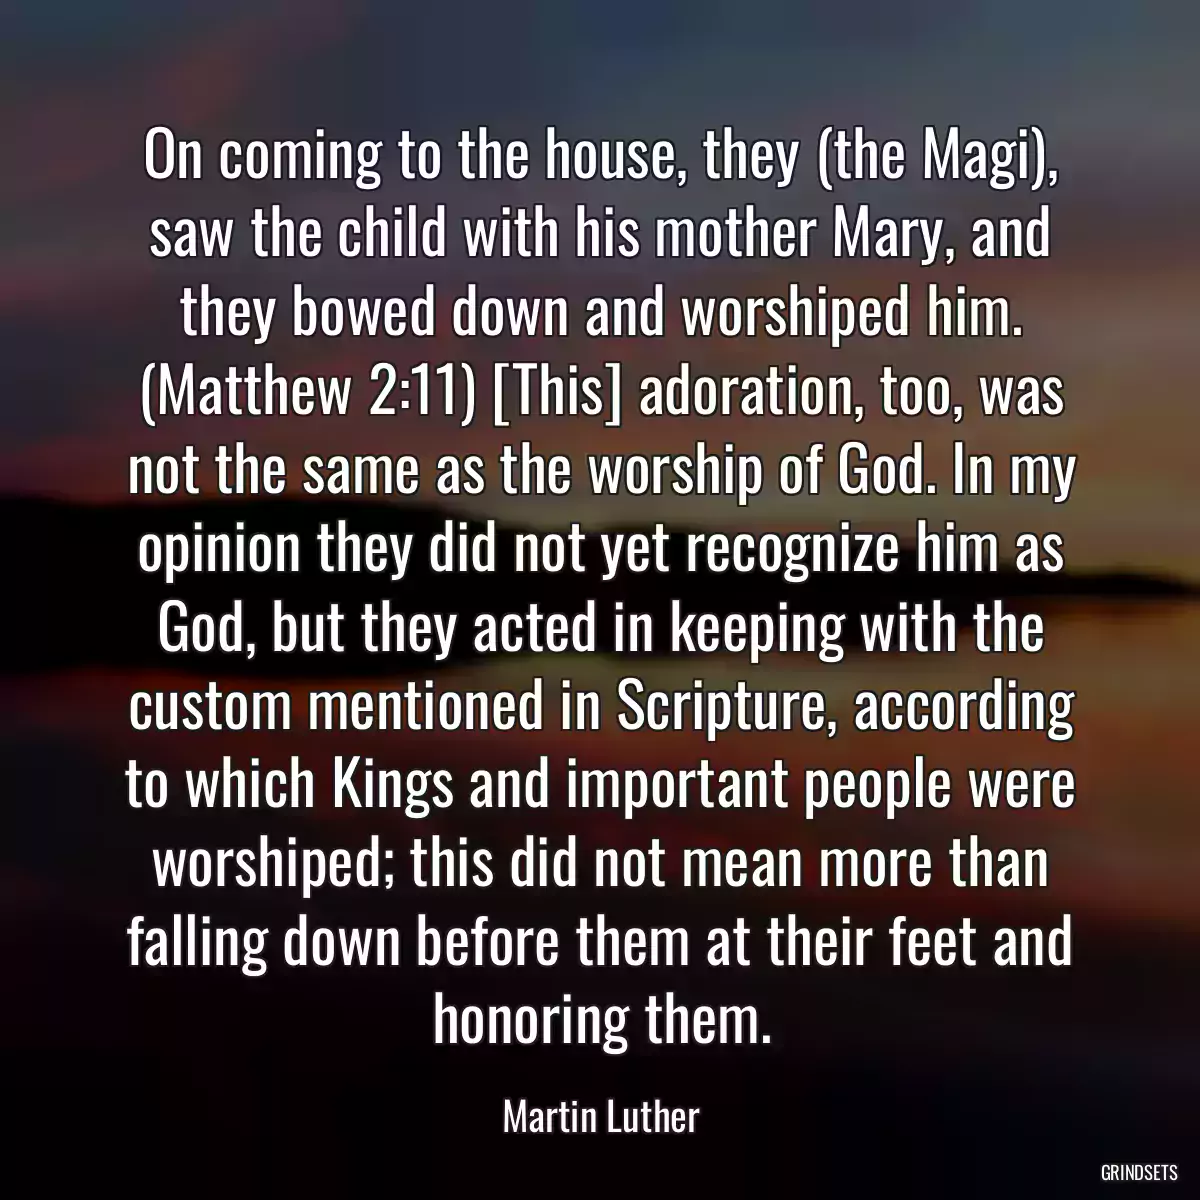 On coming to the house, they (the Magi), saw the child with his mother Mary, and they bowed down and worshiped him. (Matthew 2:11) [This] adoration, too, was not the same as the worship of God. In my opinion they did not yet recognize him as God, but they acted in keeping with the custom mentioned in Scripture, according to which Kings and important people were worshiped; this did not mean more than falling down before them at their feet and honoring them.